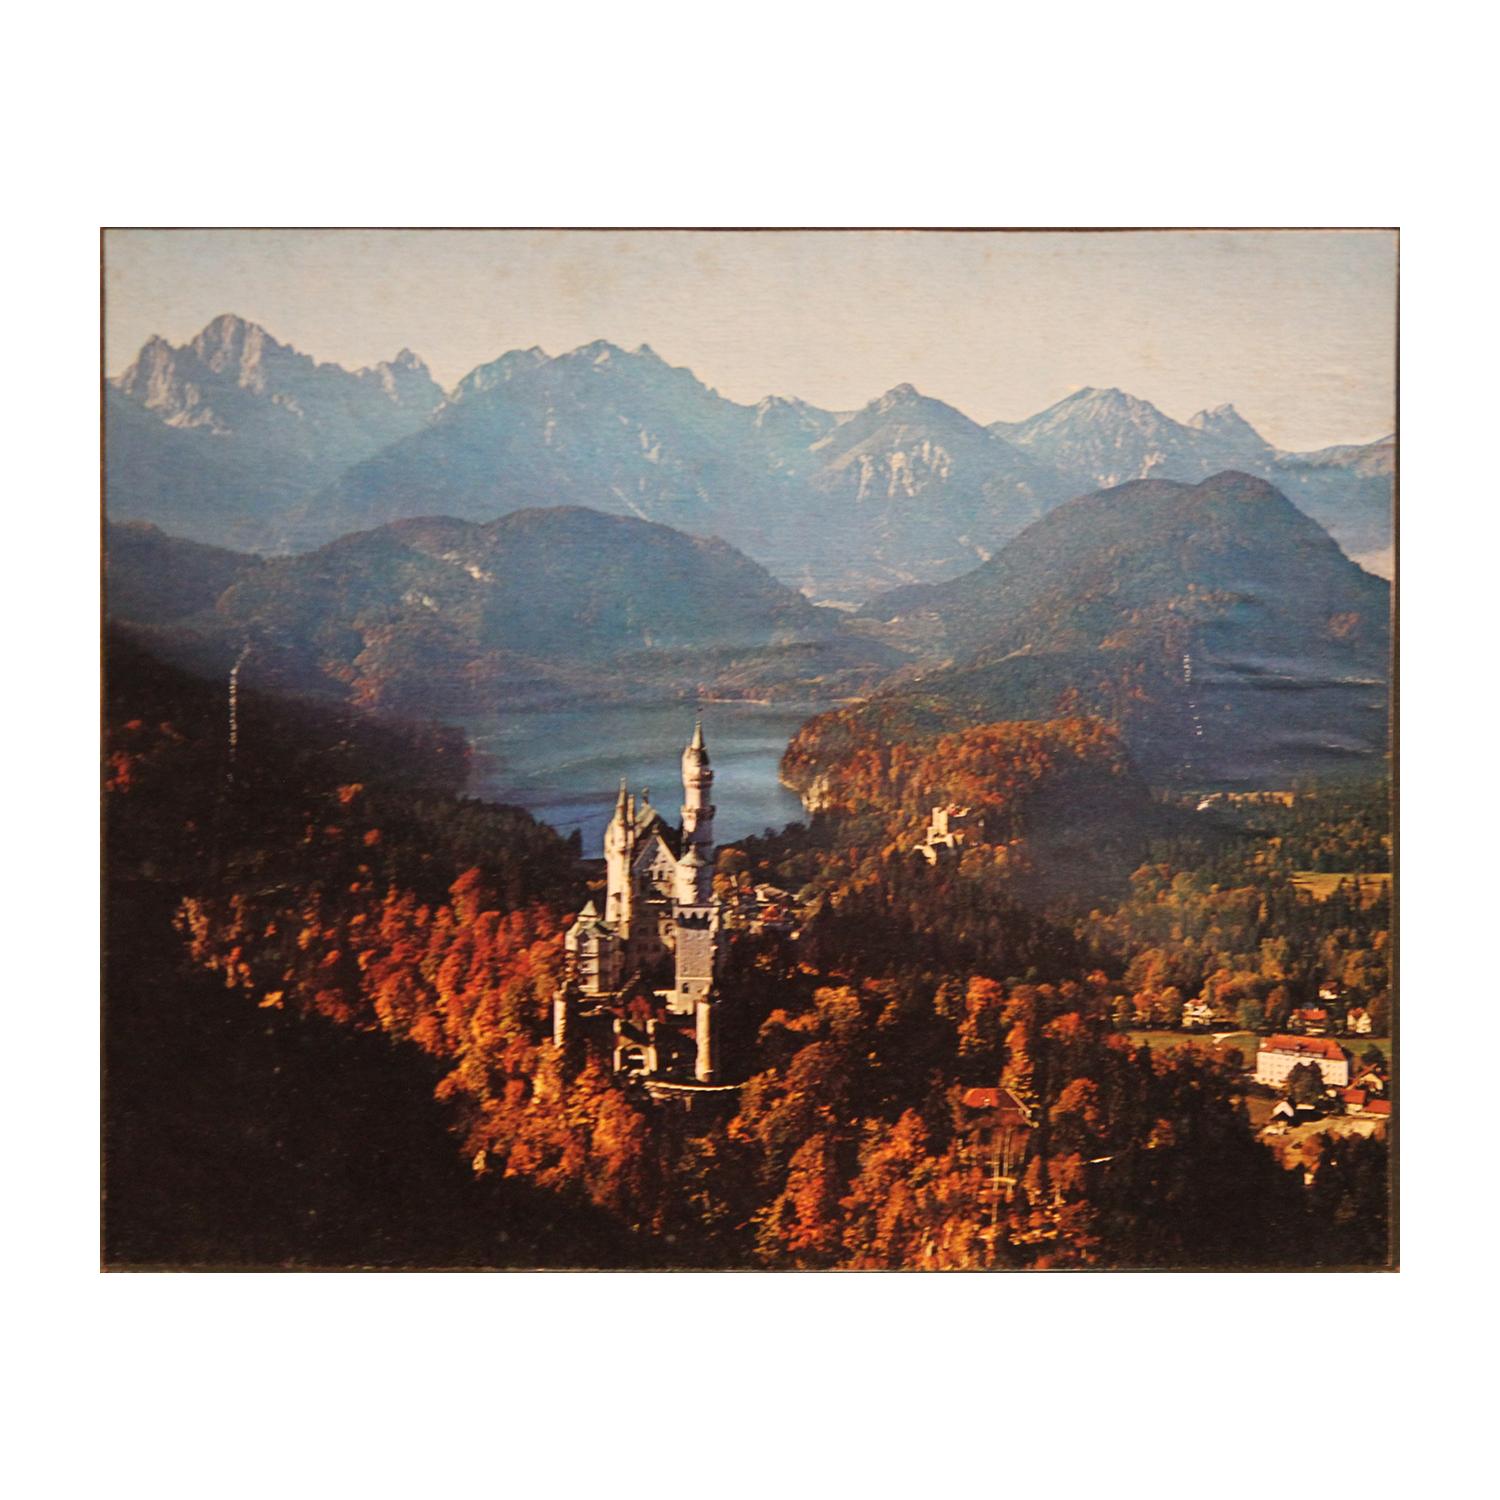 Unknown Landscape Photograph - Neuschwanstein Castle in the Forrest Bavaria Germany Colored Photograph